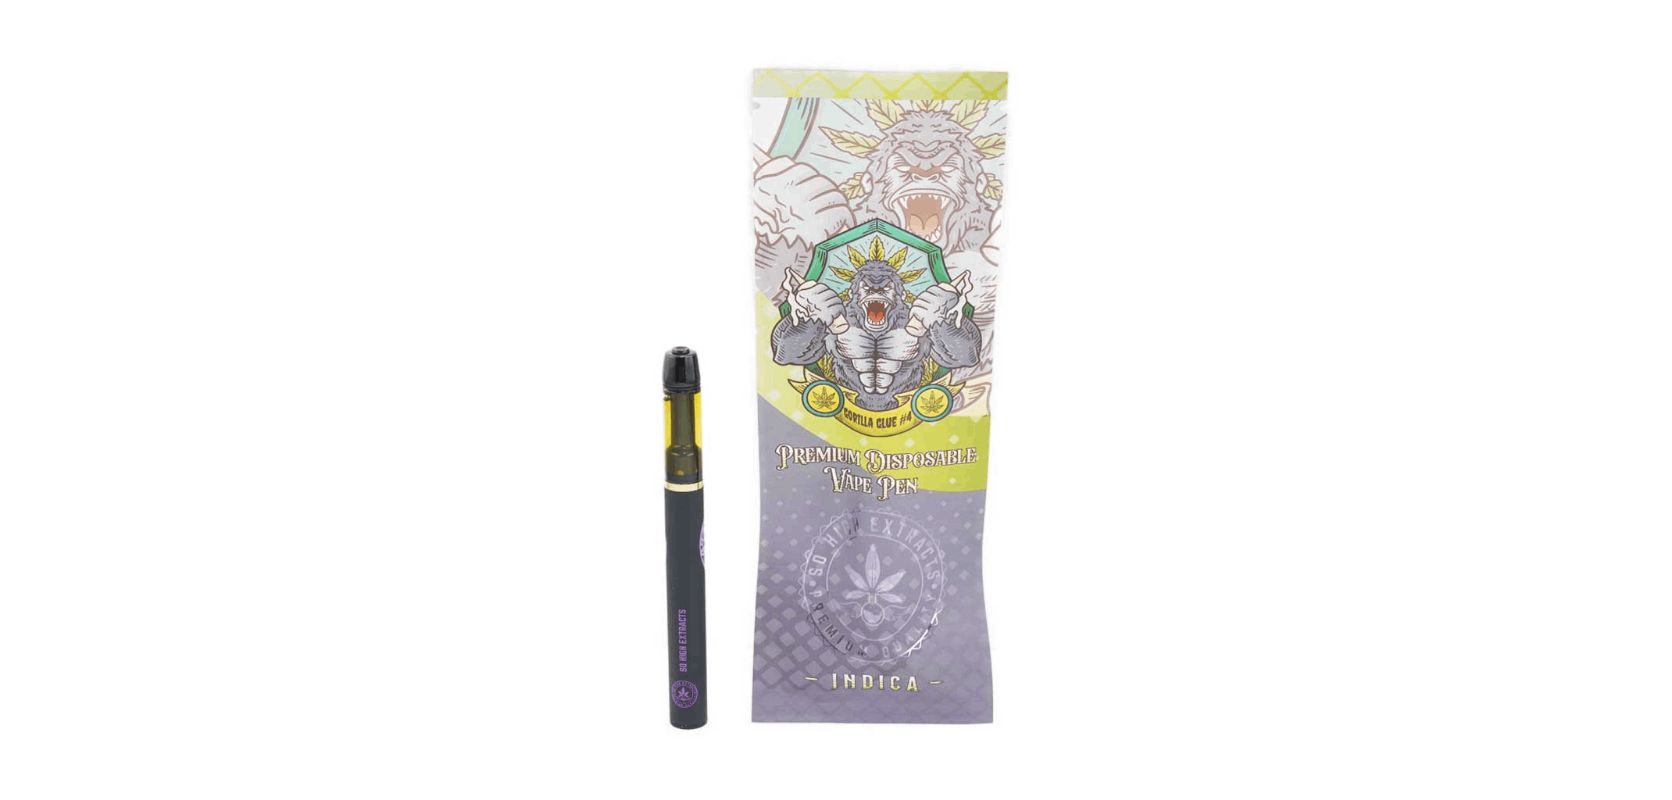 The So High Extracts Disposable Pen – Gorilla Glue #4 1ml (Indica) is one of the best bulk THC vape pens in Canada, owing to its smooth and yummy flavour, quick-acting effects, and monstrous potency. 